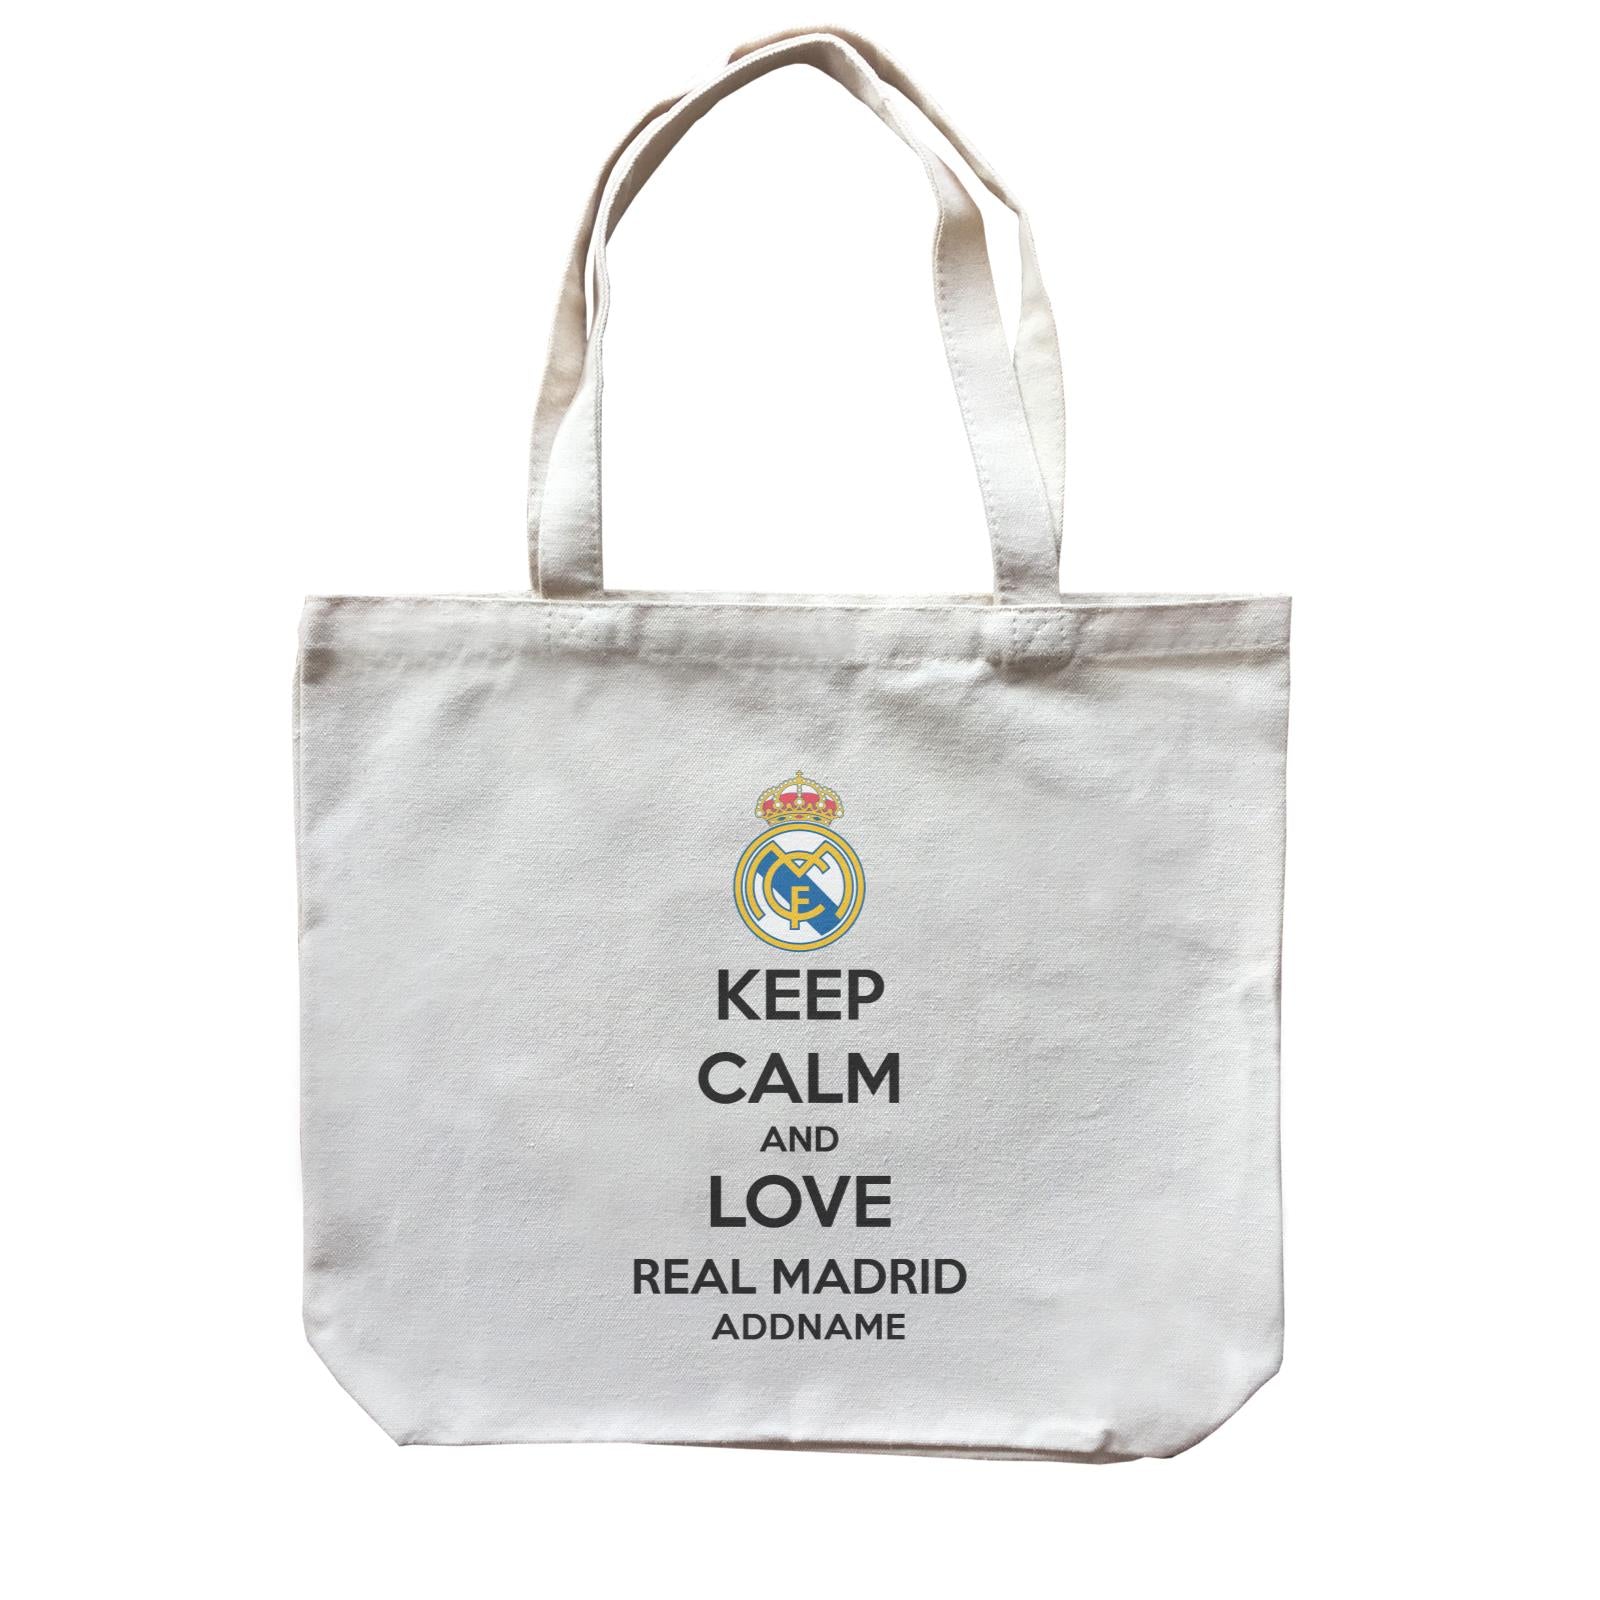 Real Madrid Football Keep Calm And Love Series Addname Canvas Bag